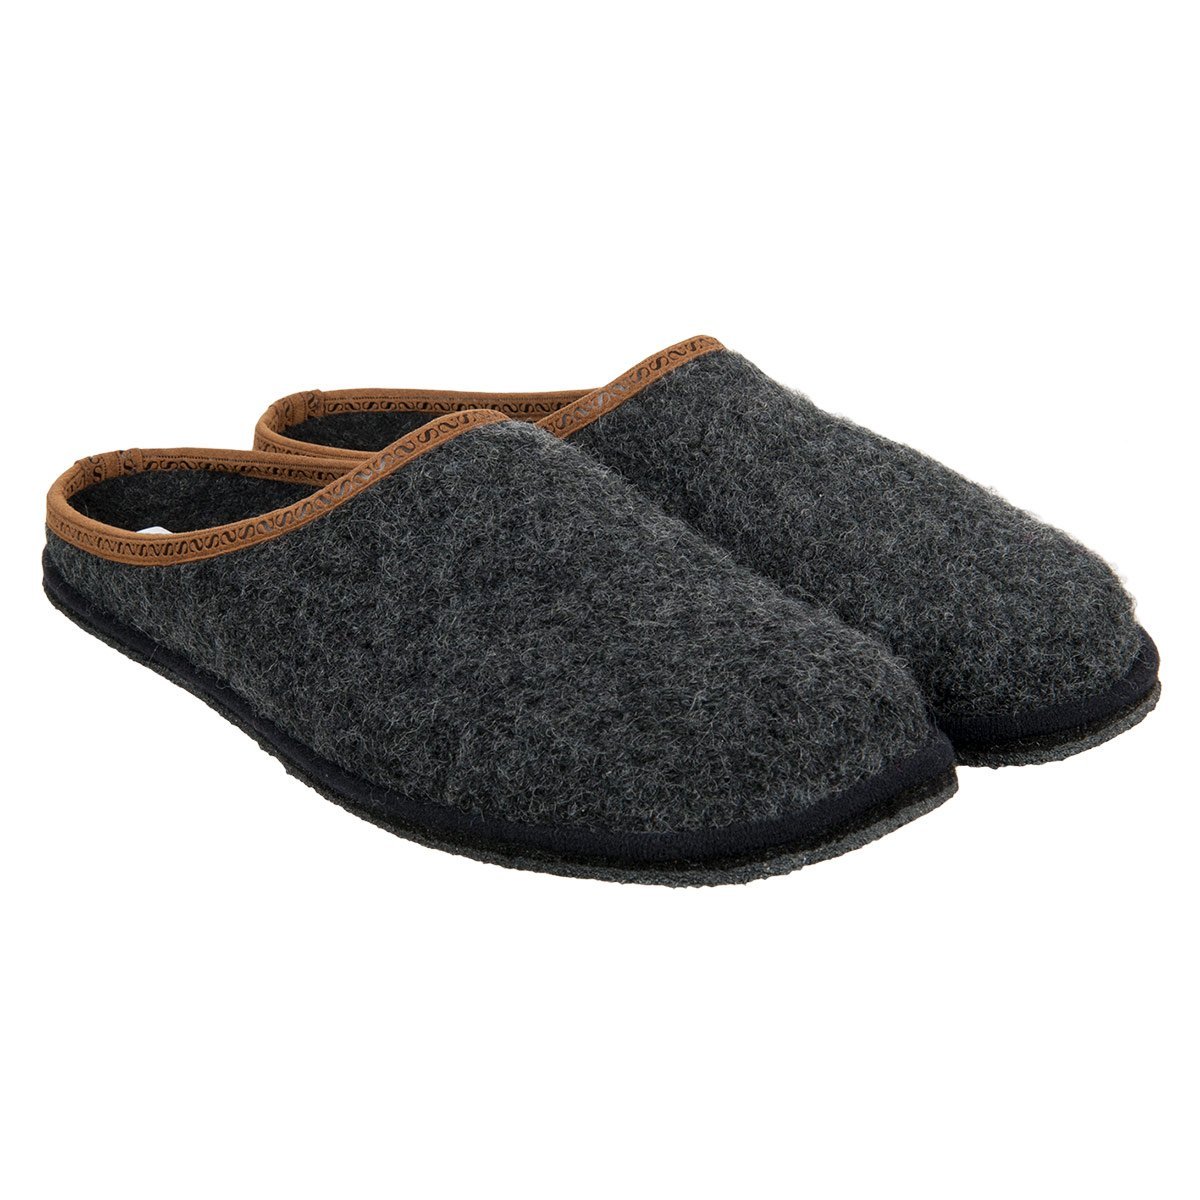 slippers with non slip soles